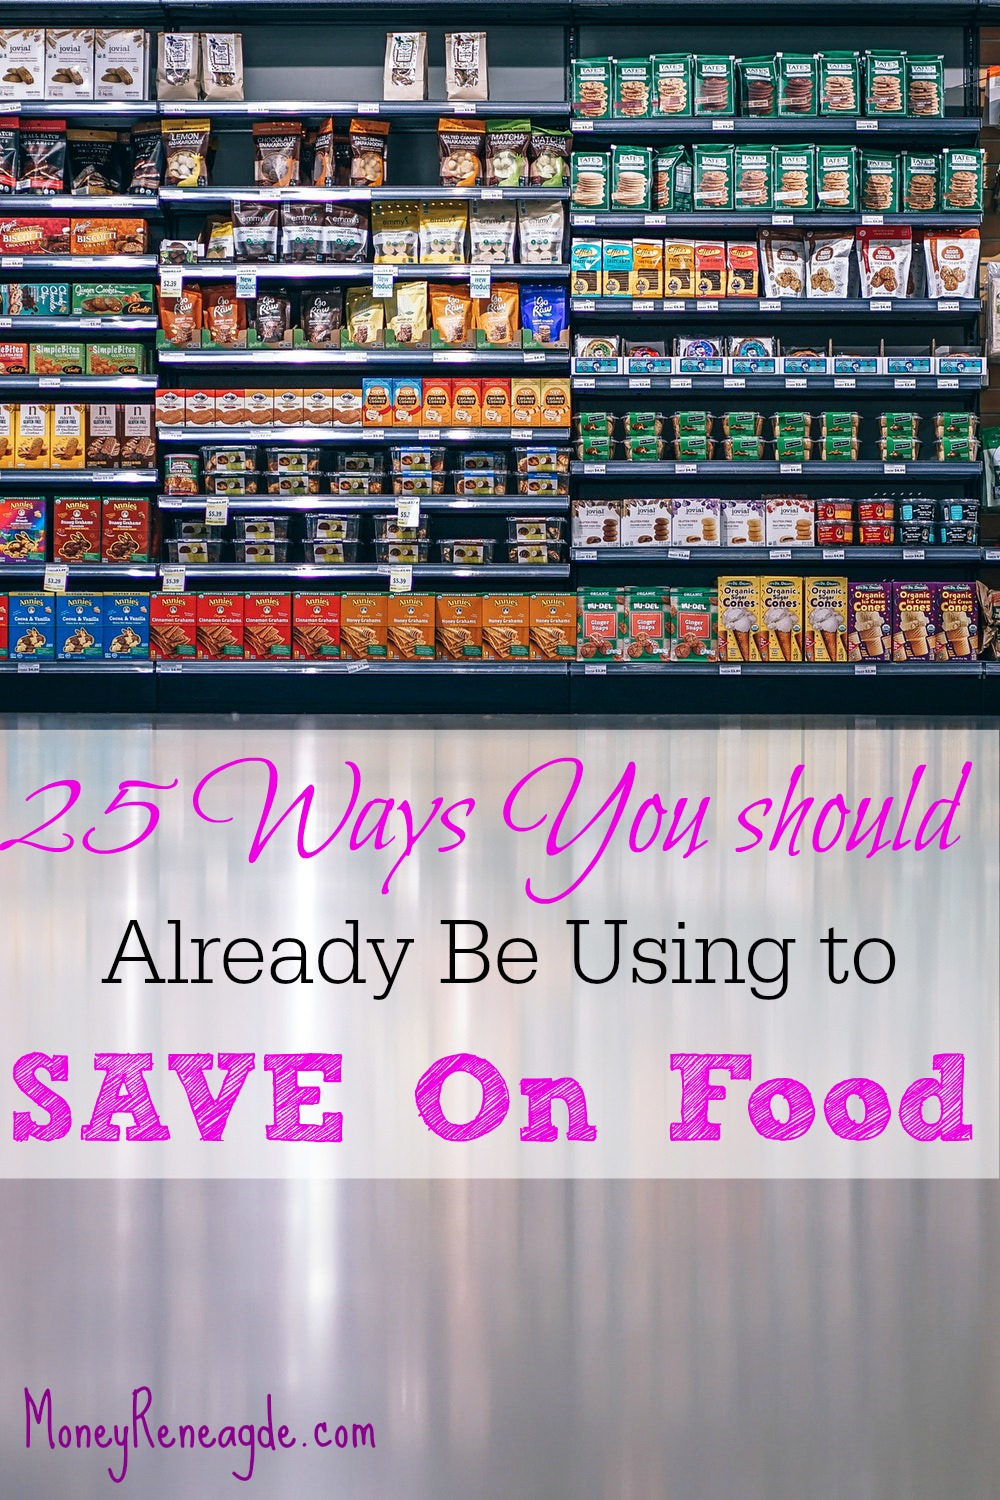 25 ways you should already be using to save on food